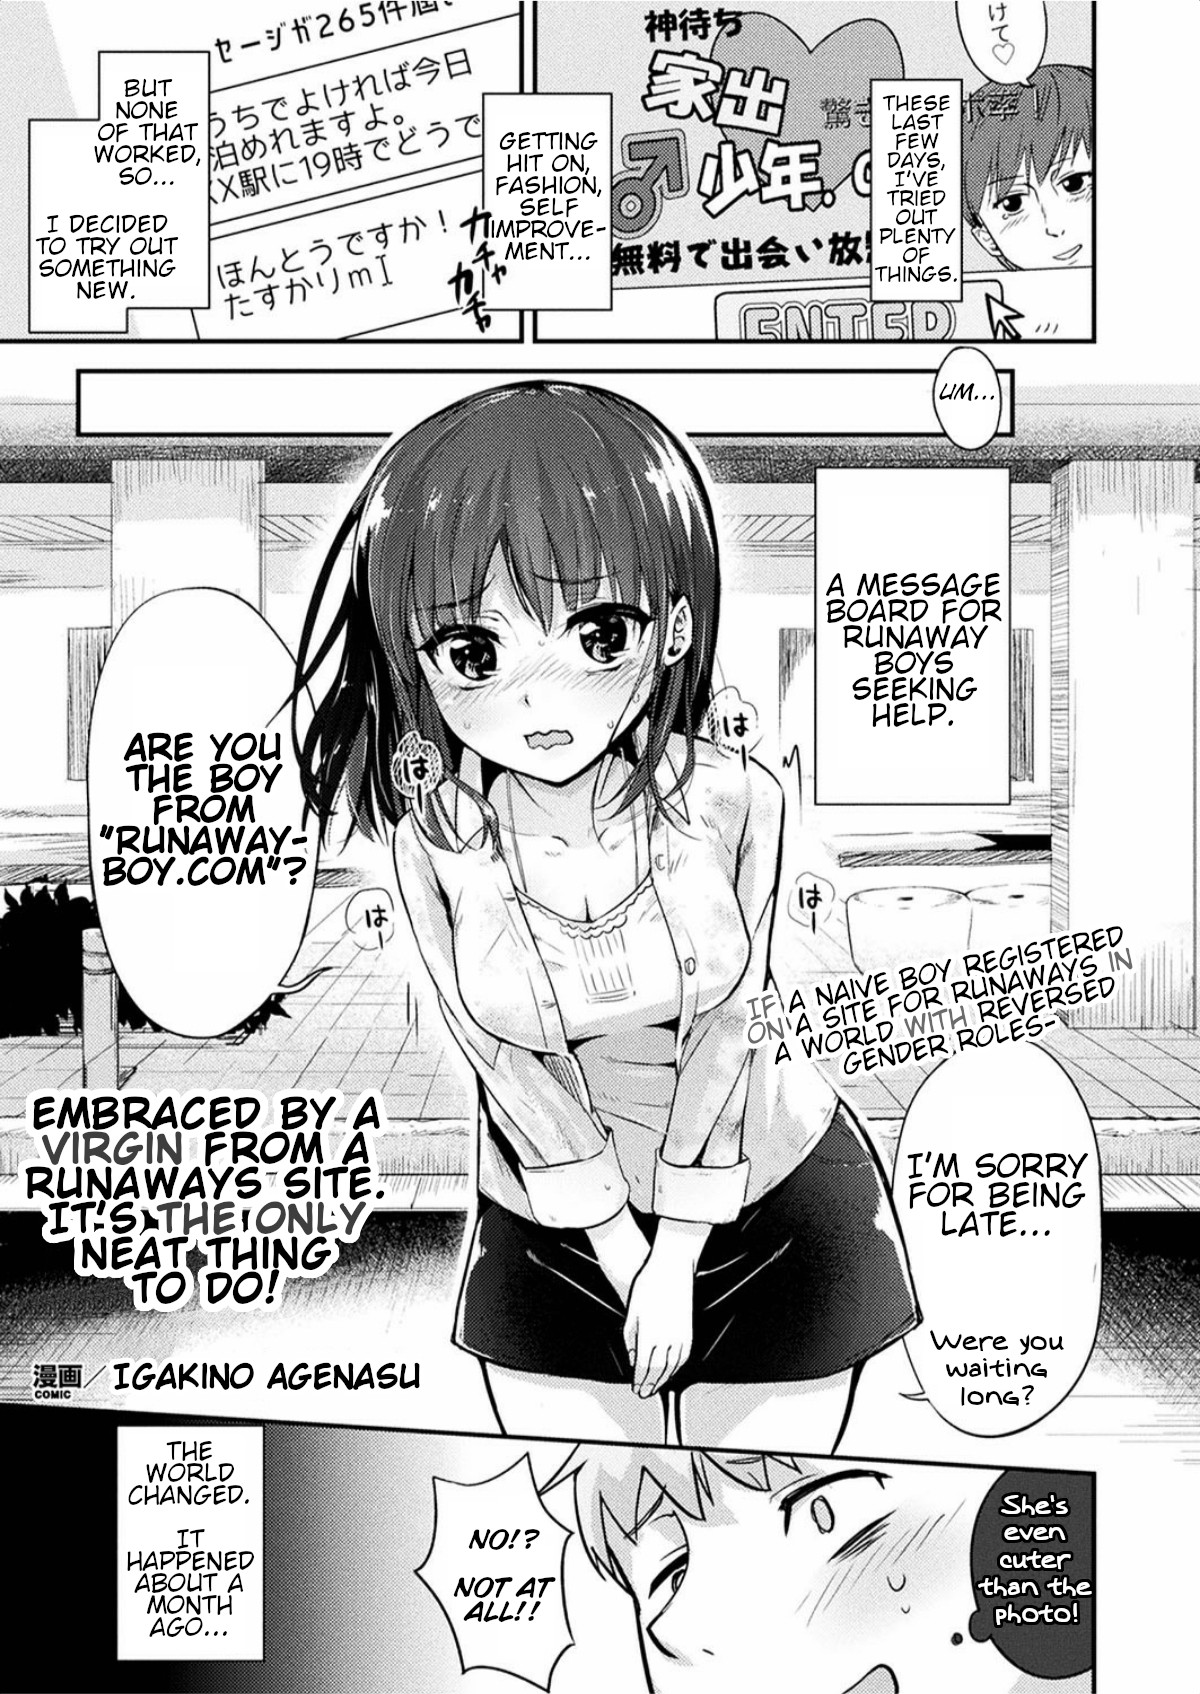 Hentai Manga Comic-Embraced By A Virgin From A Runaway Site-Read-1